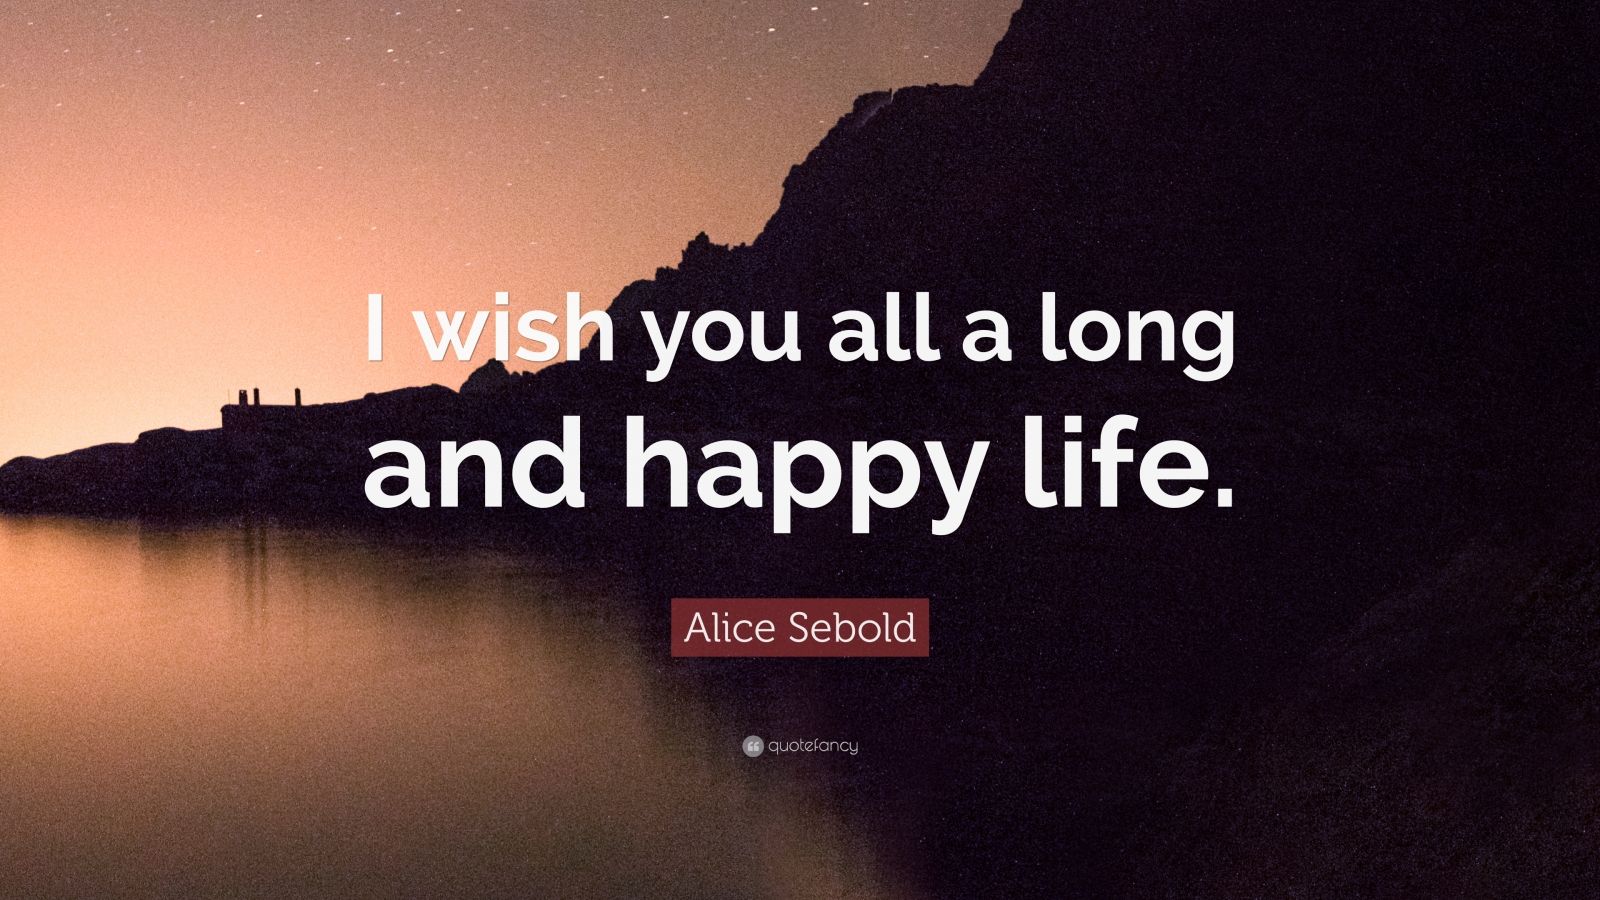 Alice Sebold Quote: “I wish you all a long and happy life.”